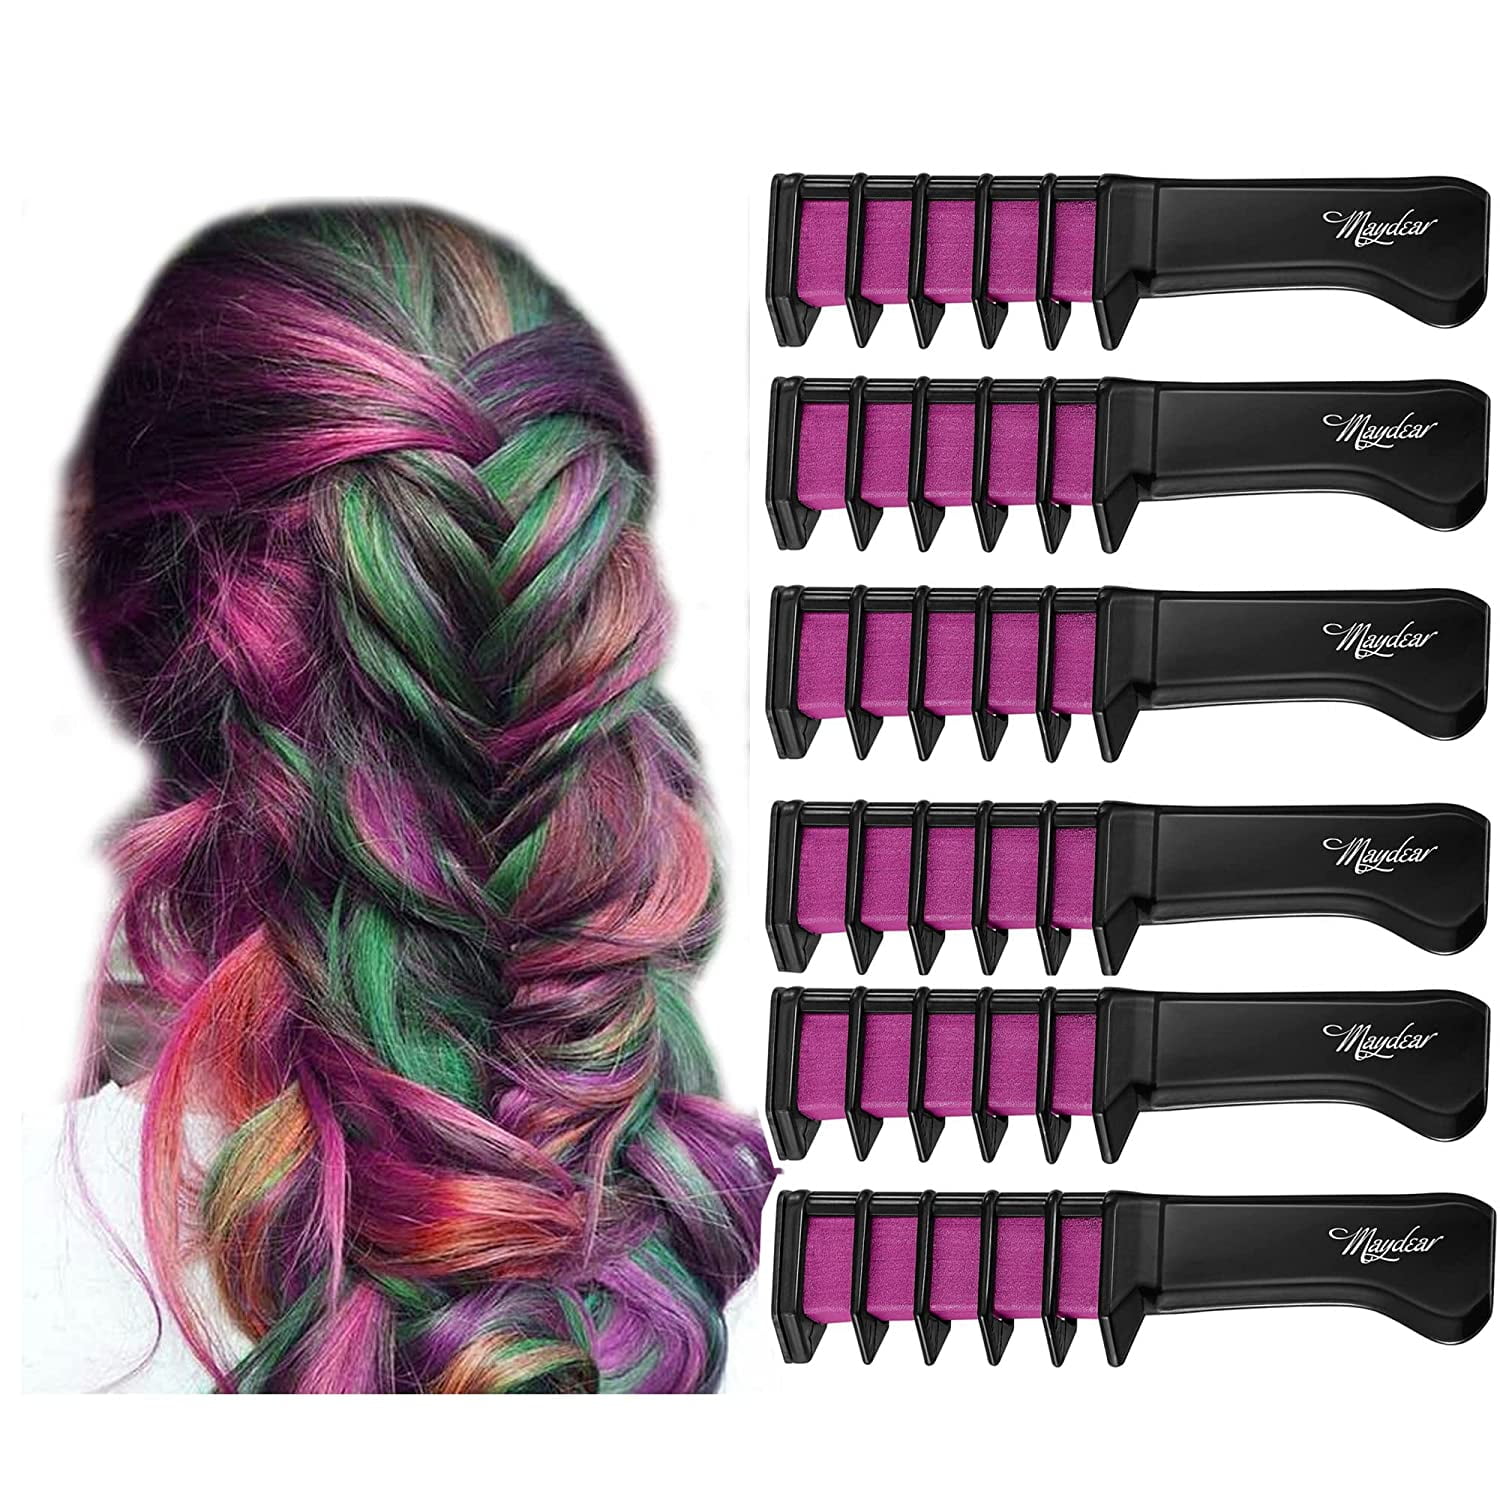 Sanmadrola Hair Chalk Comb for Girls Washable Temporary DIY Hair Color Dye  Chalk For Kids Cosplay Christmas Gifts, 10 Colors